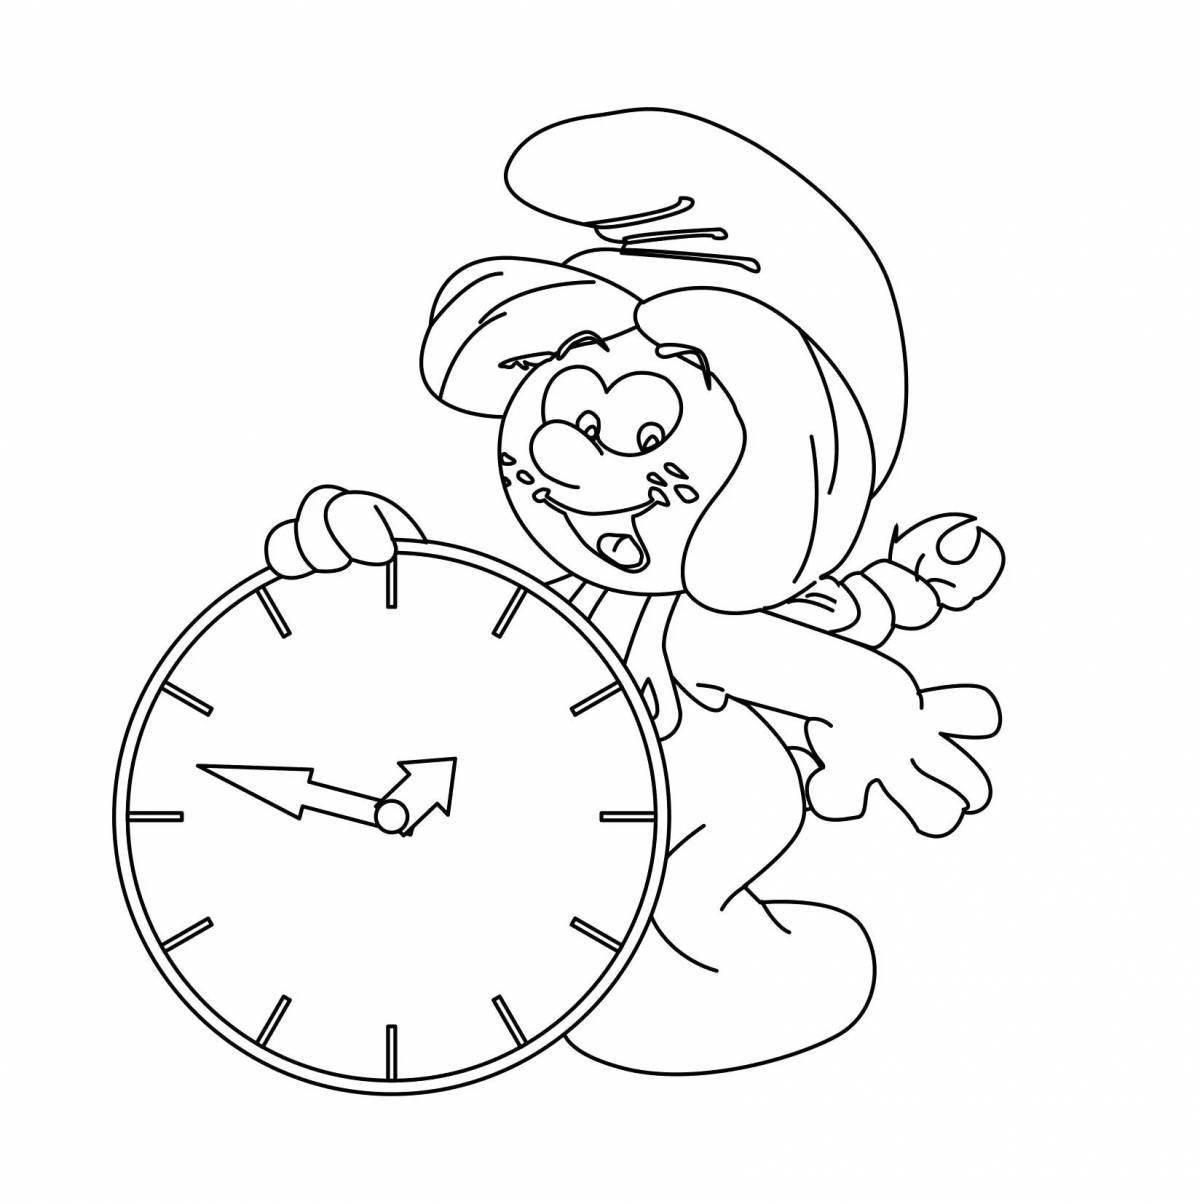 Awesome clock coloring pages